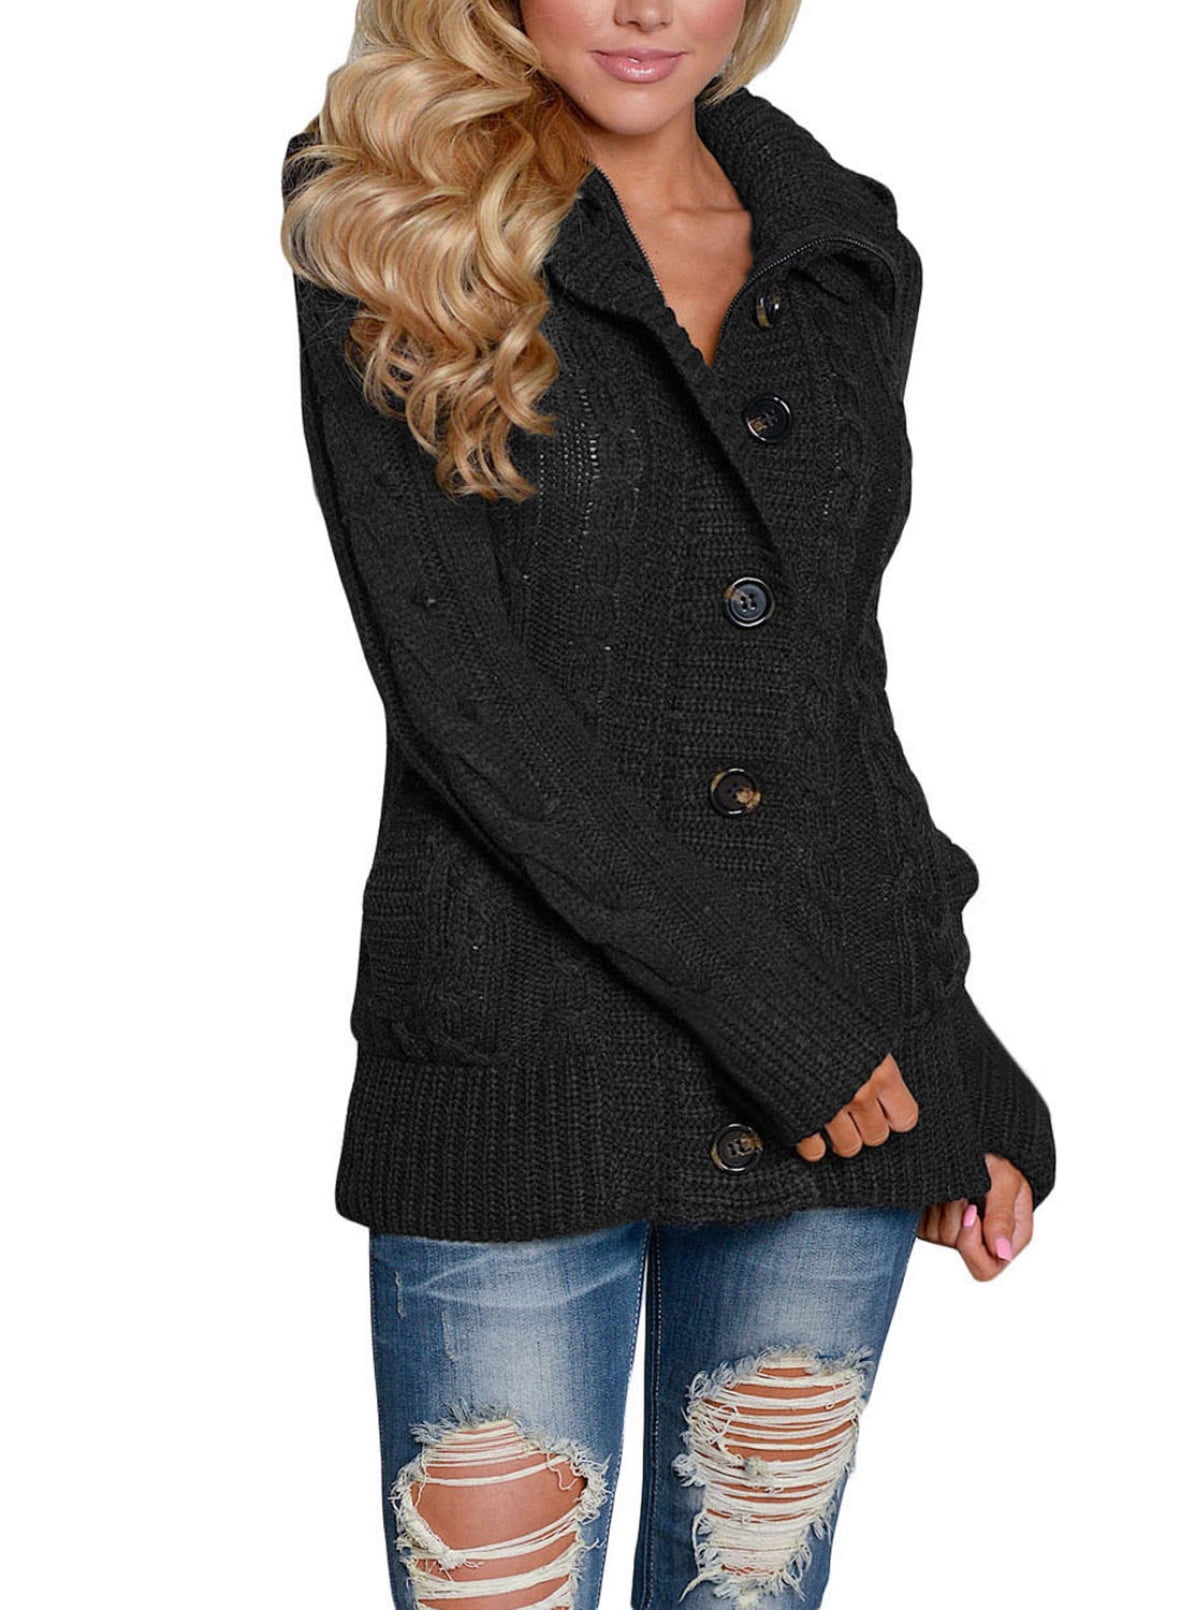 Eytino Hooded Cardigan Sweaters for Women Fleece Lined Sweater Button Down Cable  Knit Cardigan Coat - Walmart.com